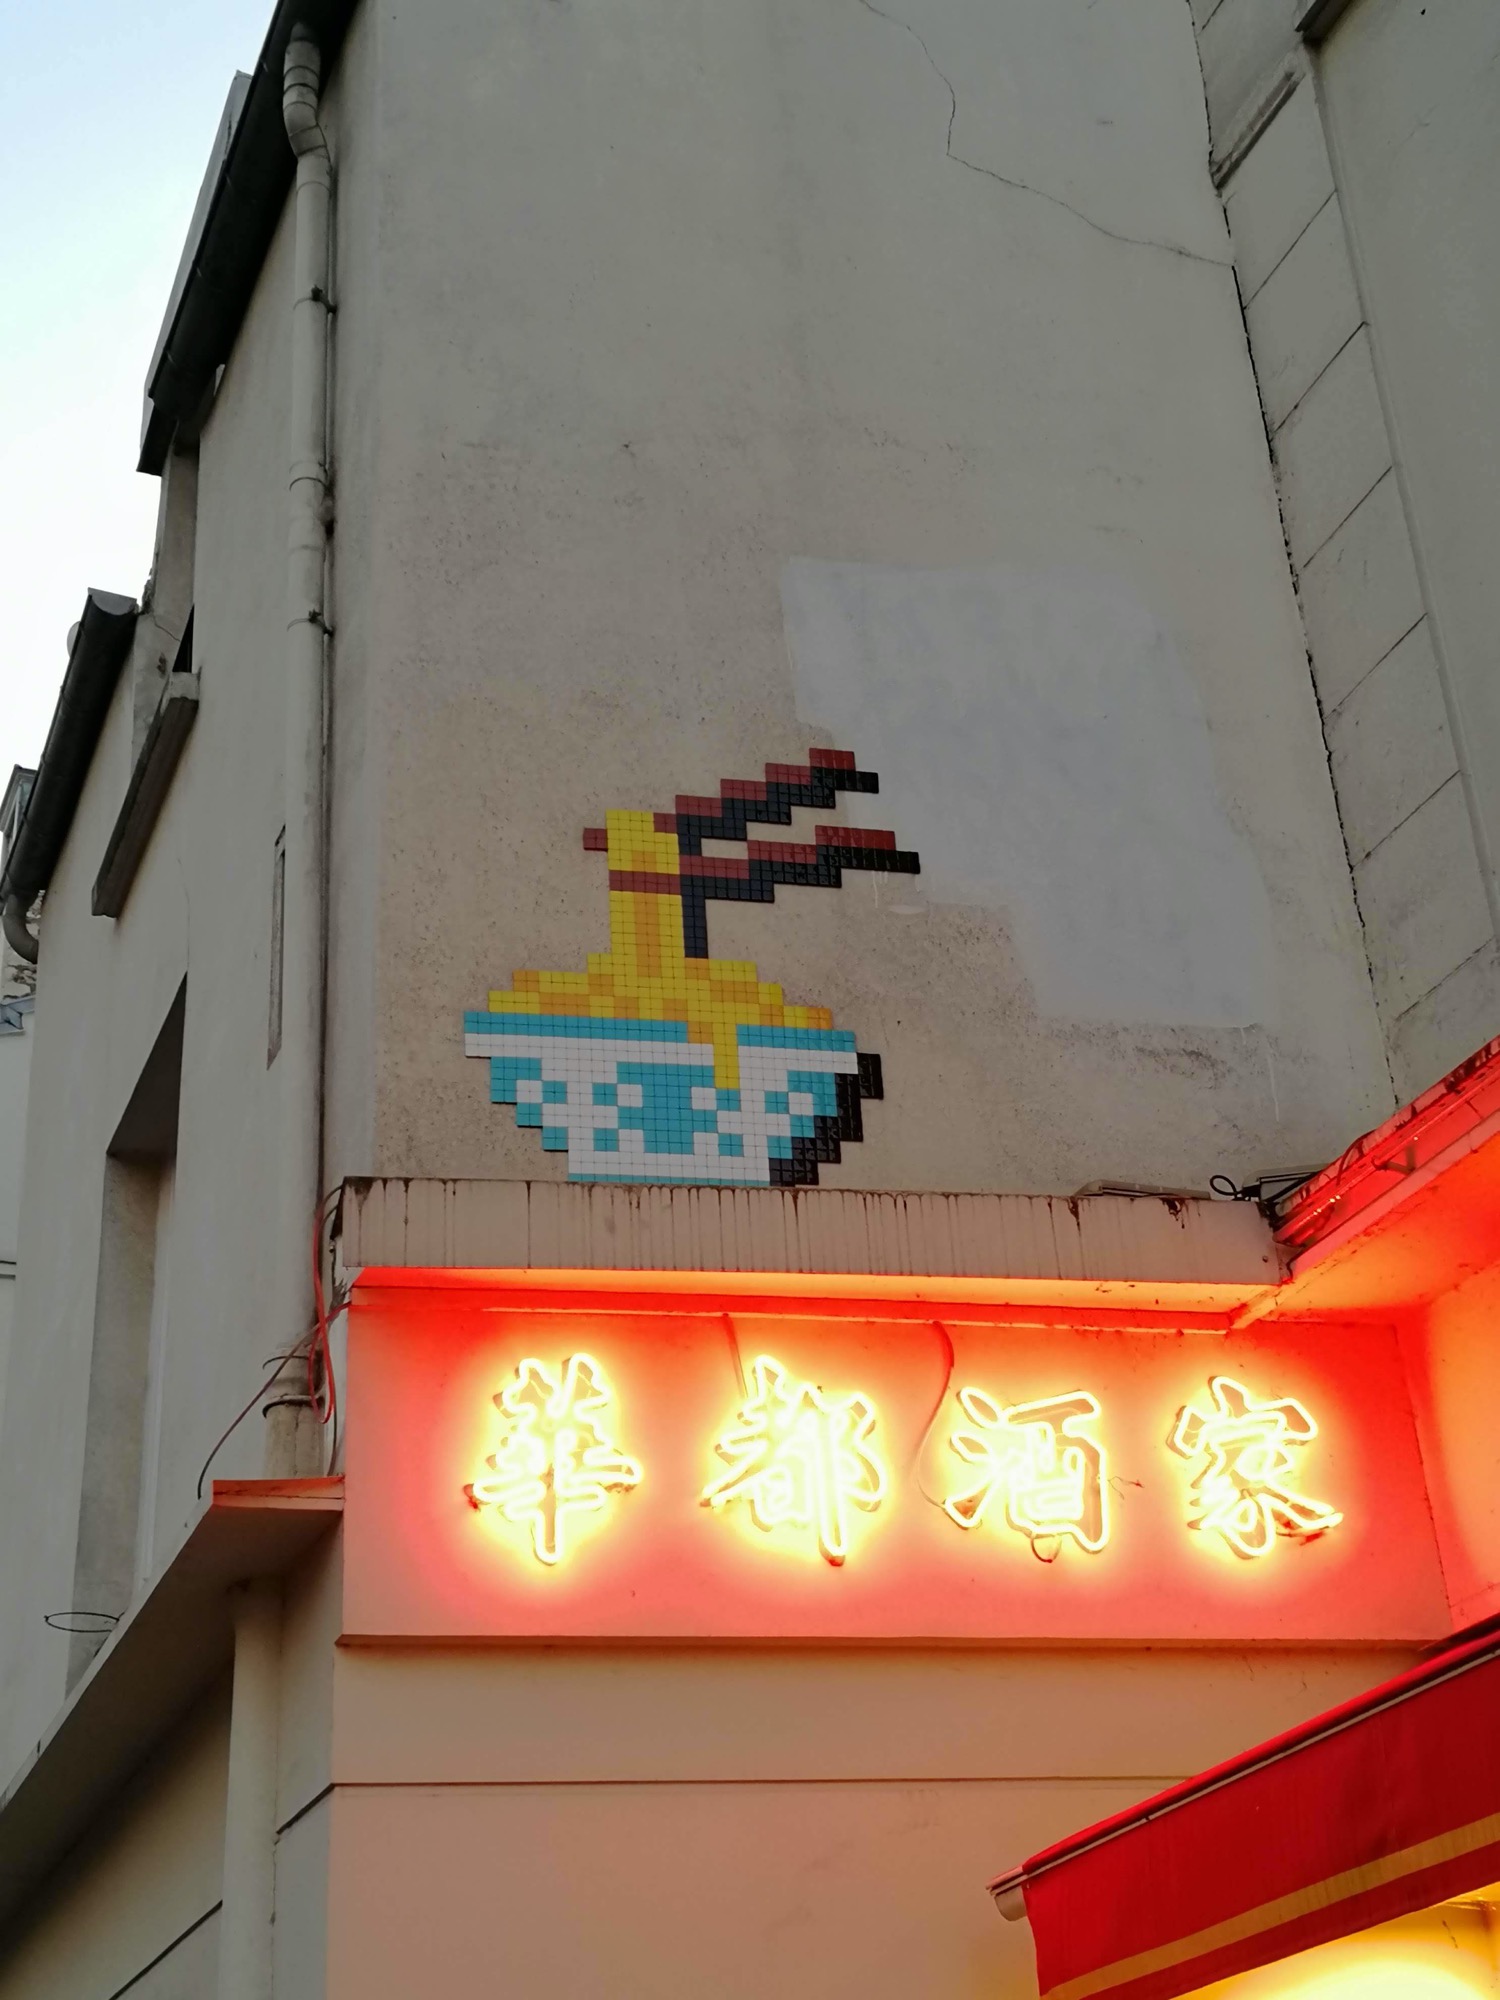 Mosaic 3244  by the artist Invader captured by Rabot in Paris France